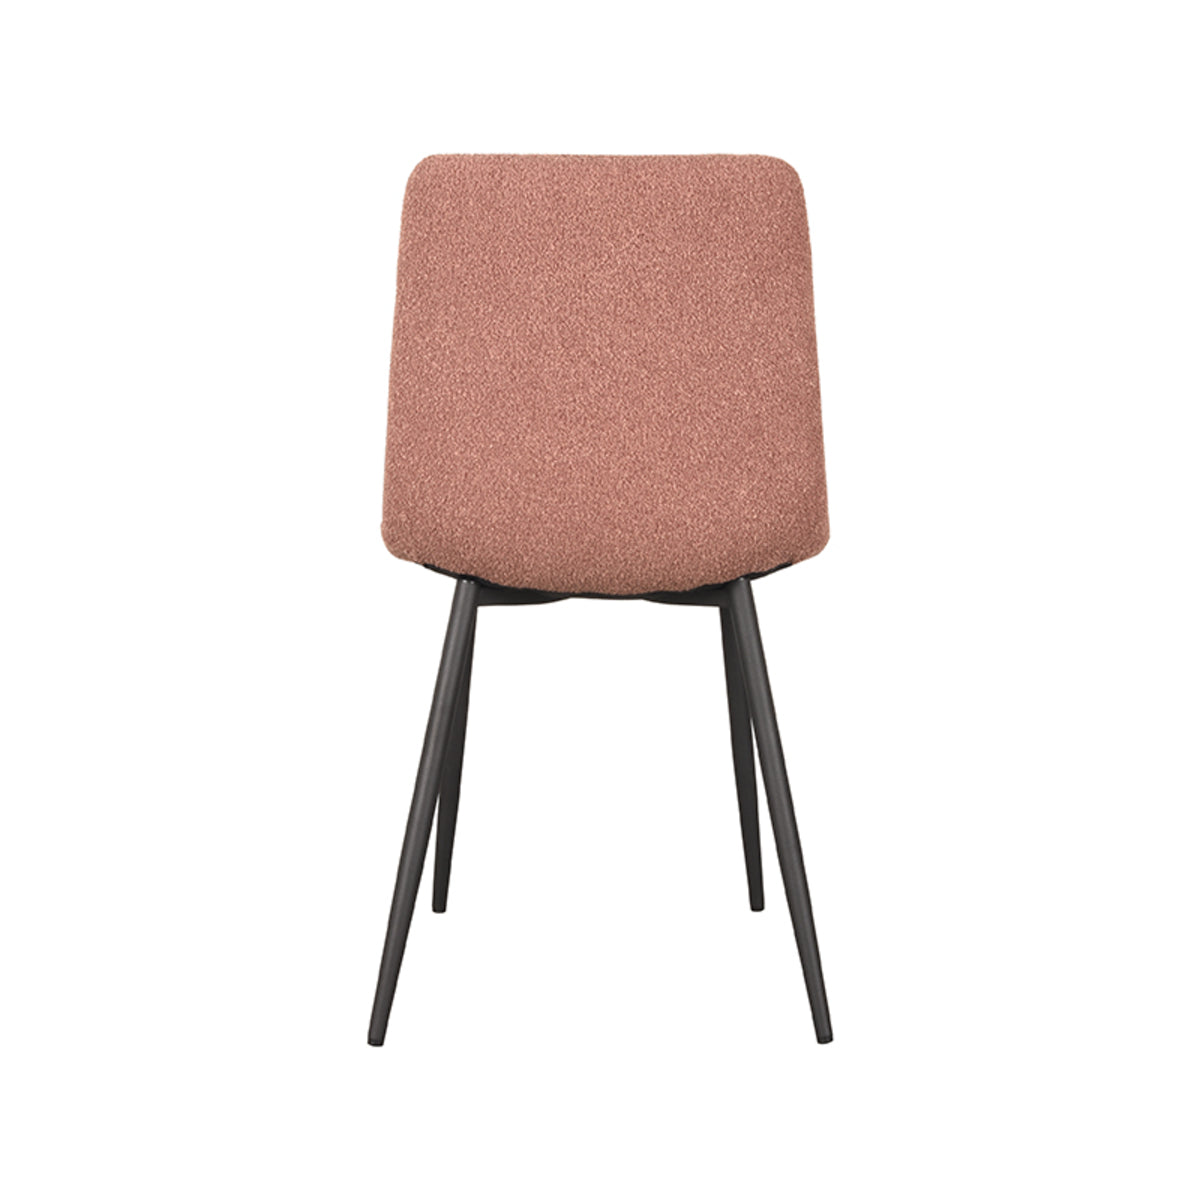 LABEL51 Juul dining room chair - Terra - Boucle | 2 pcs